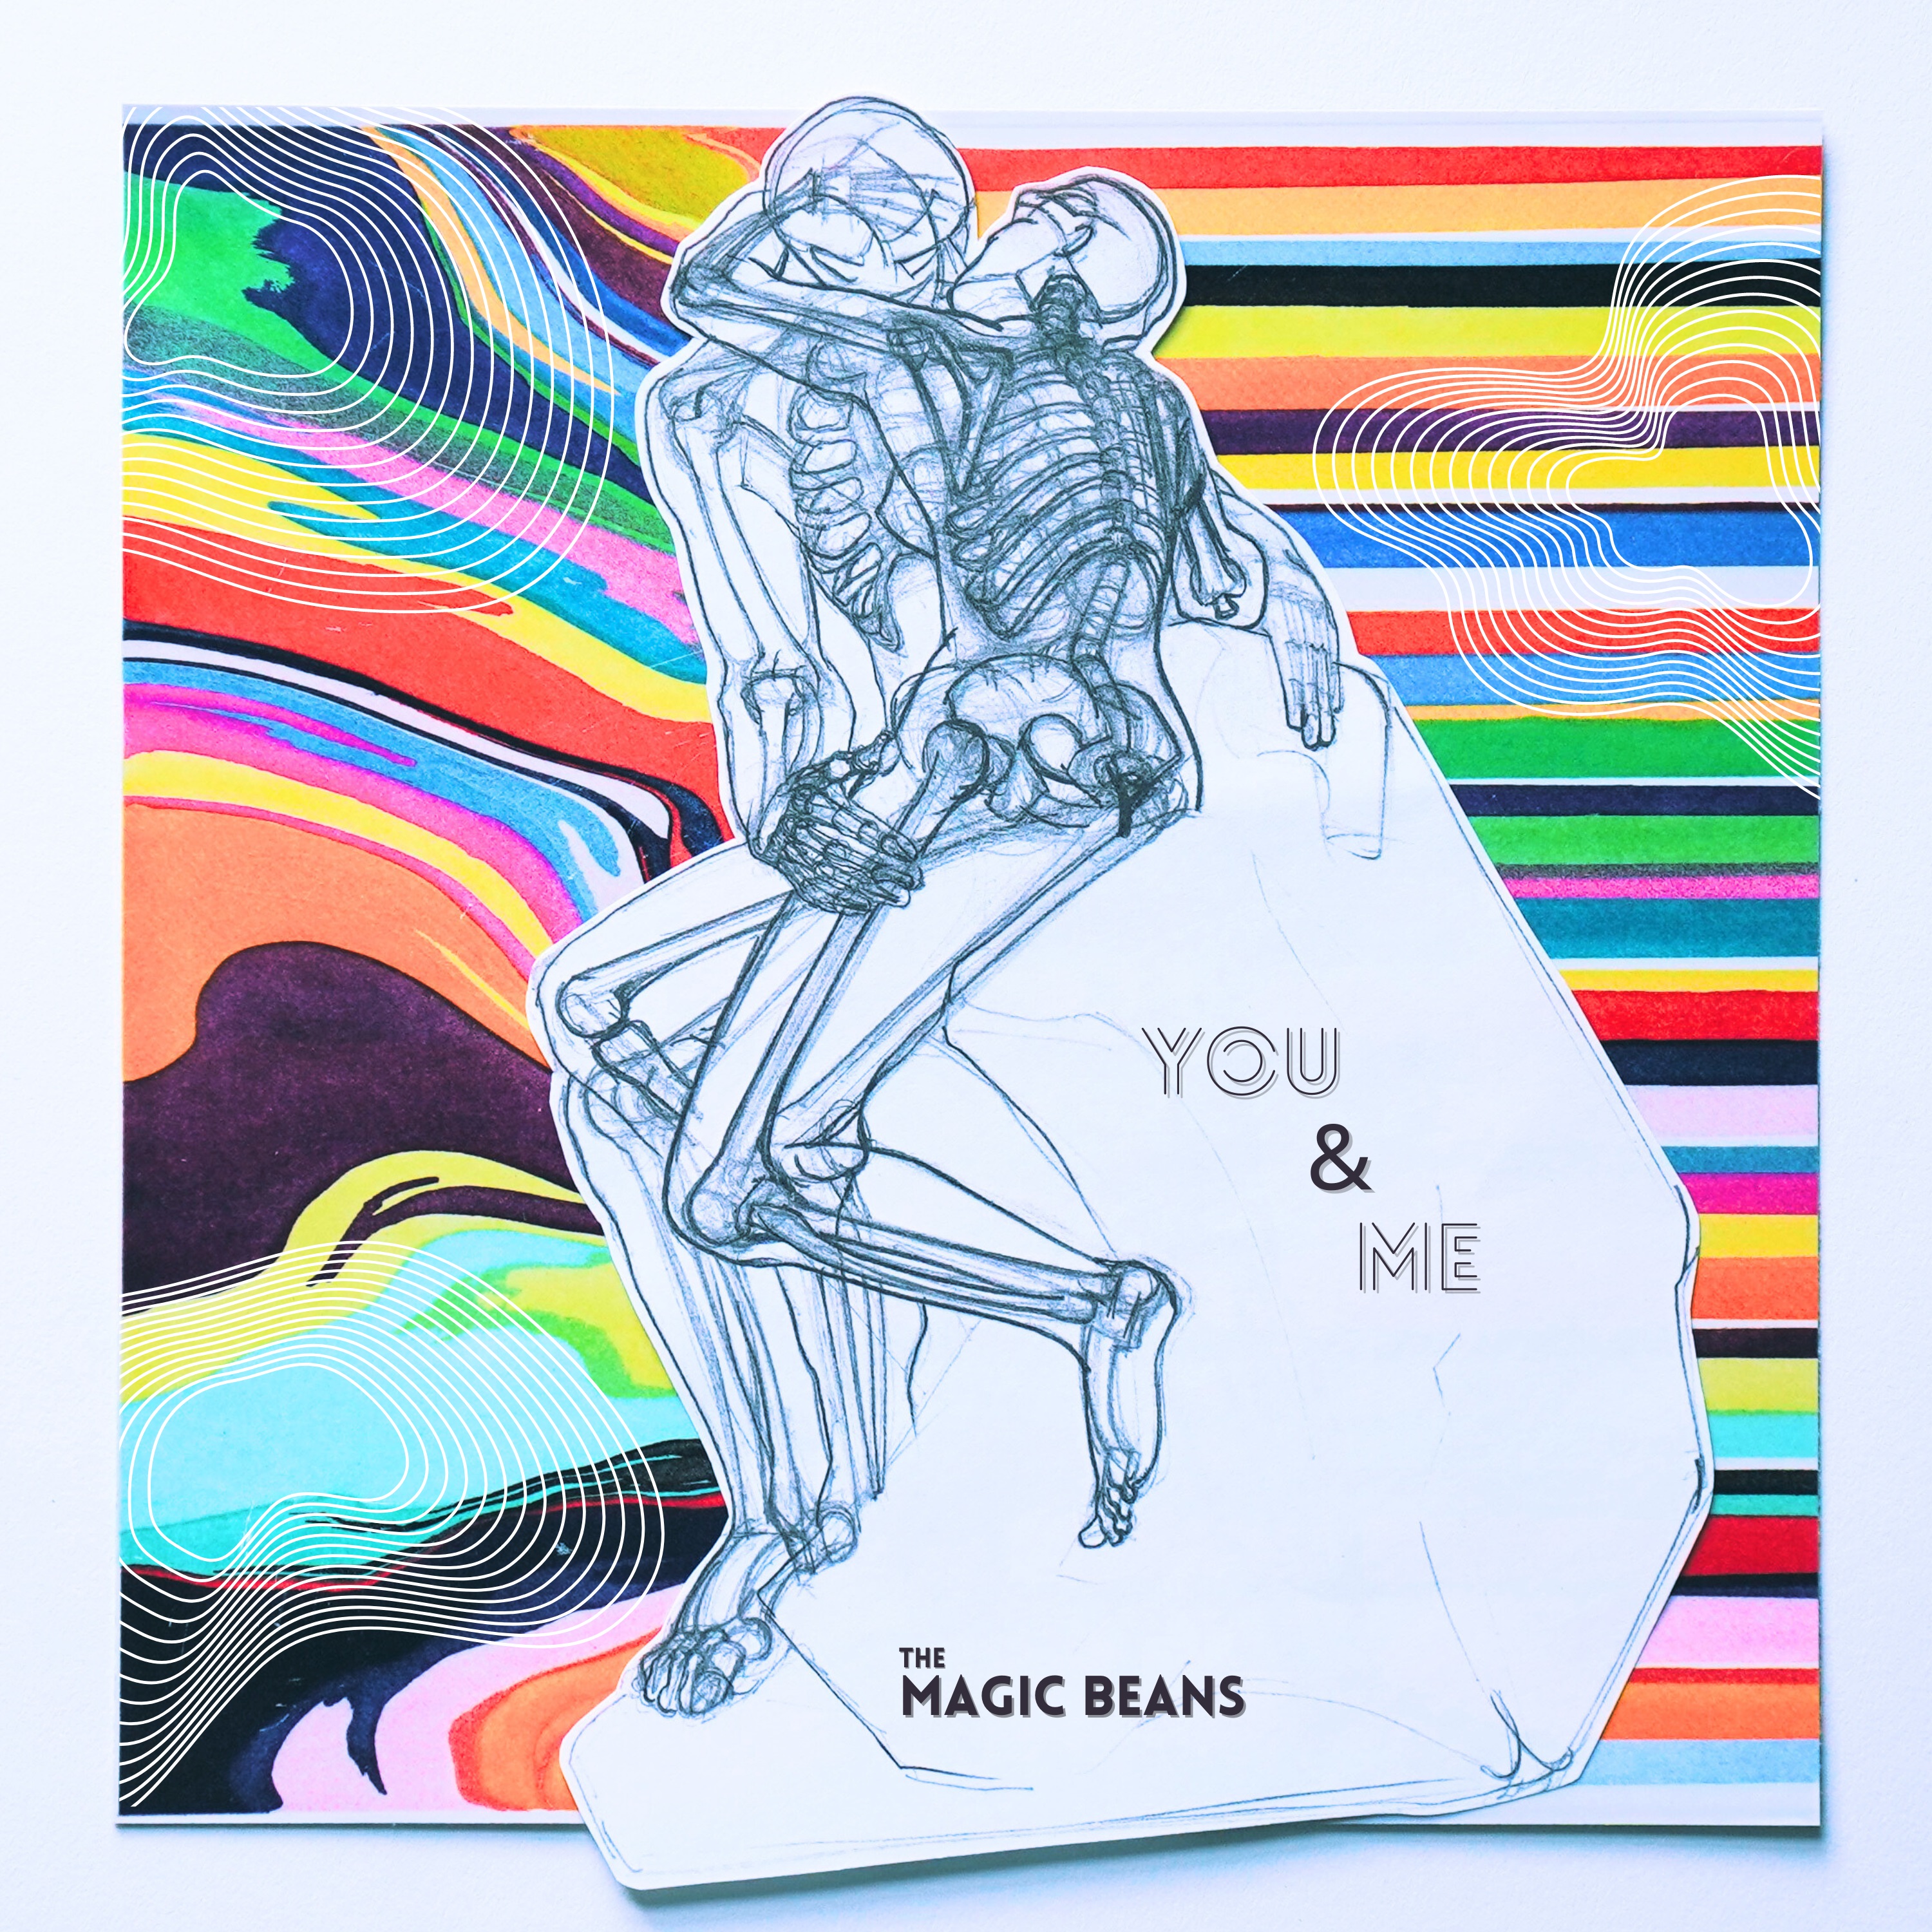 Magic Beans Broadens Lyrical Palette and Artistic Dimension With Release of “You & Me”